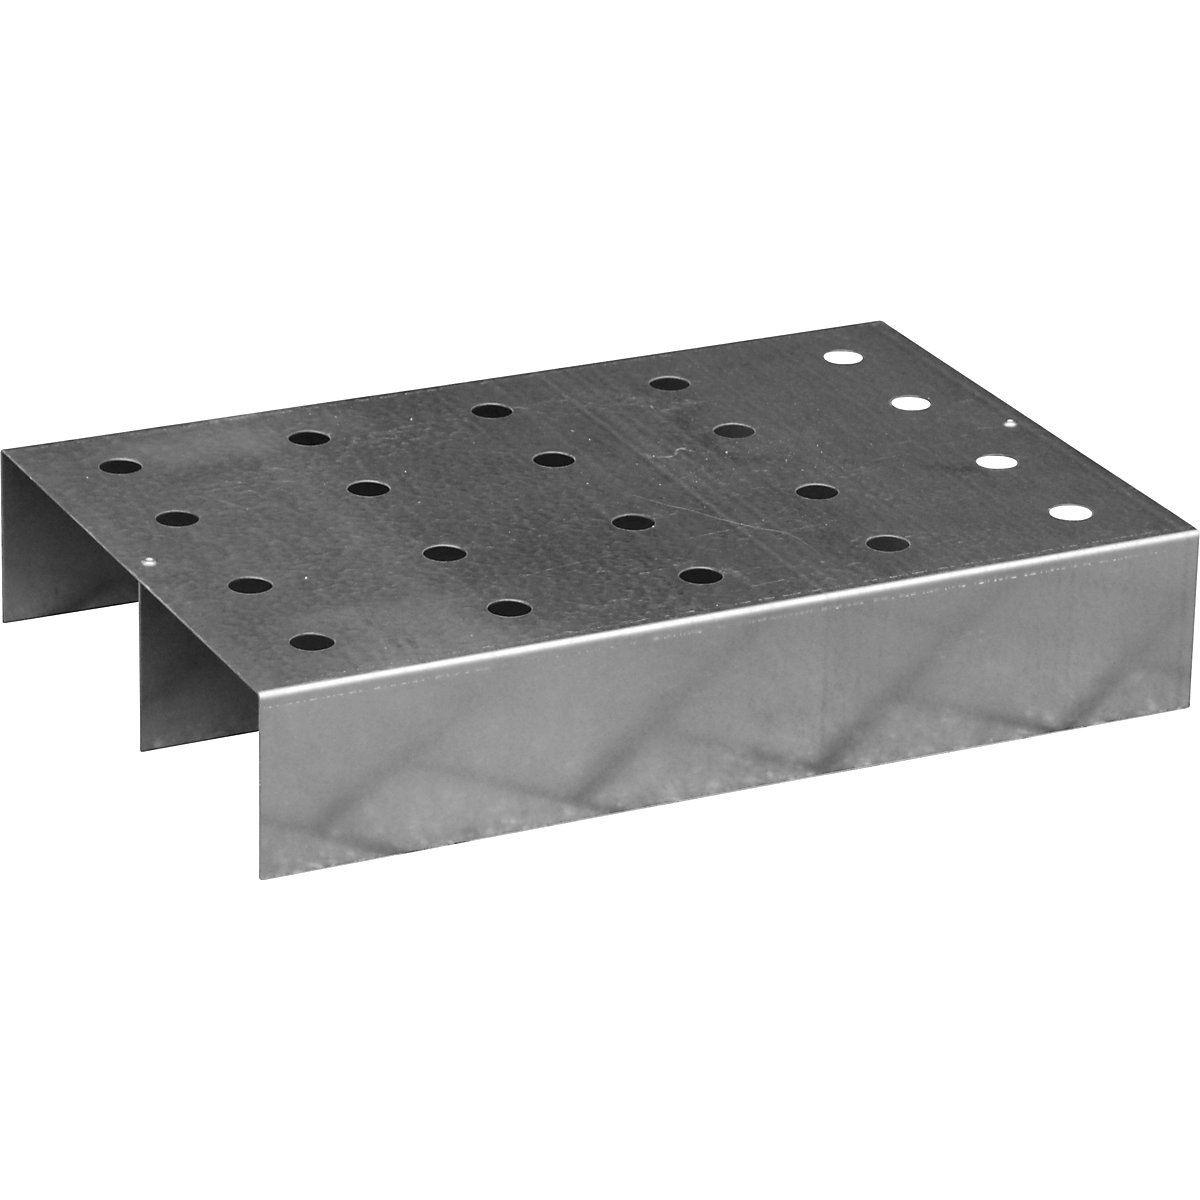 Perforated stainless steel grate – eurokraft pro